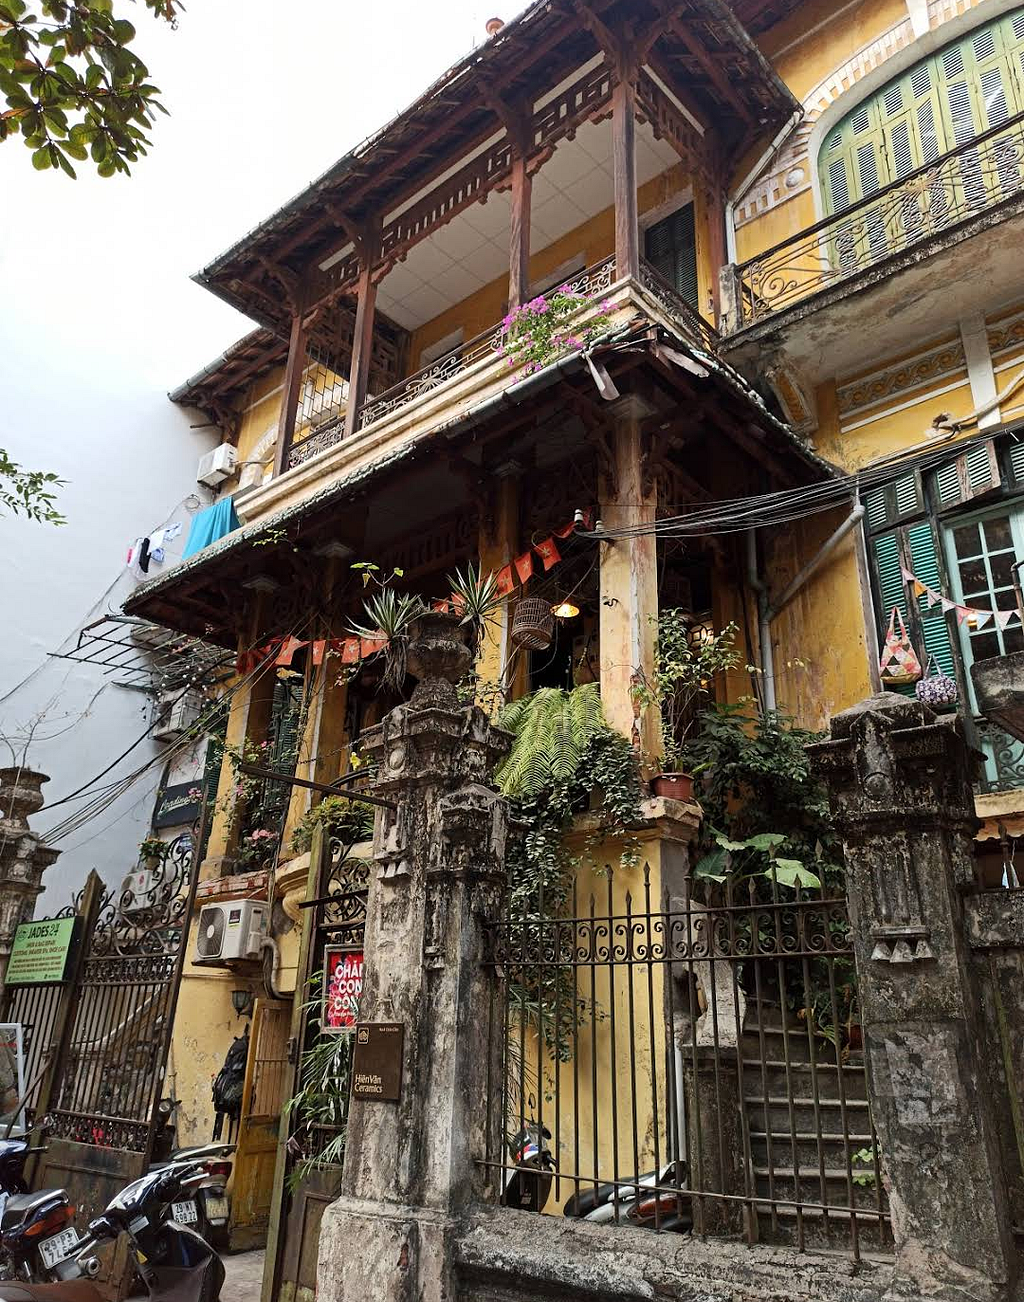 Old yellow building with large front porch and overgrown plants on stone steps in Hanoi